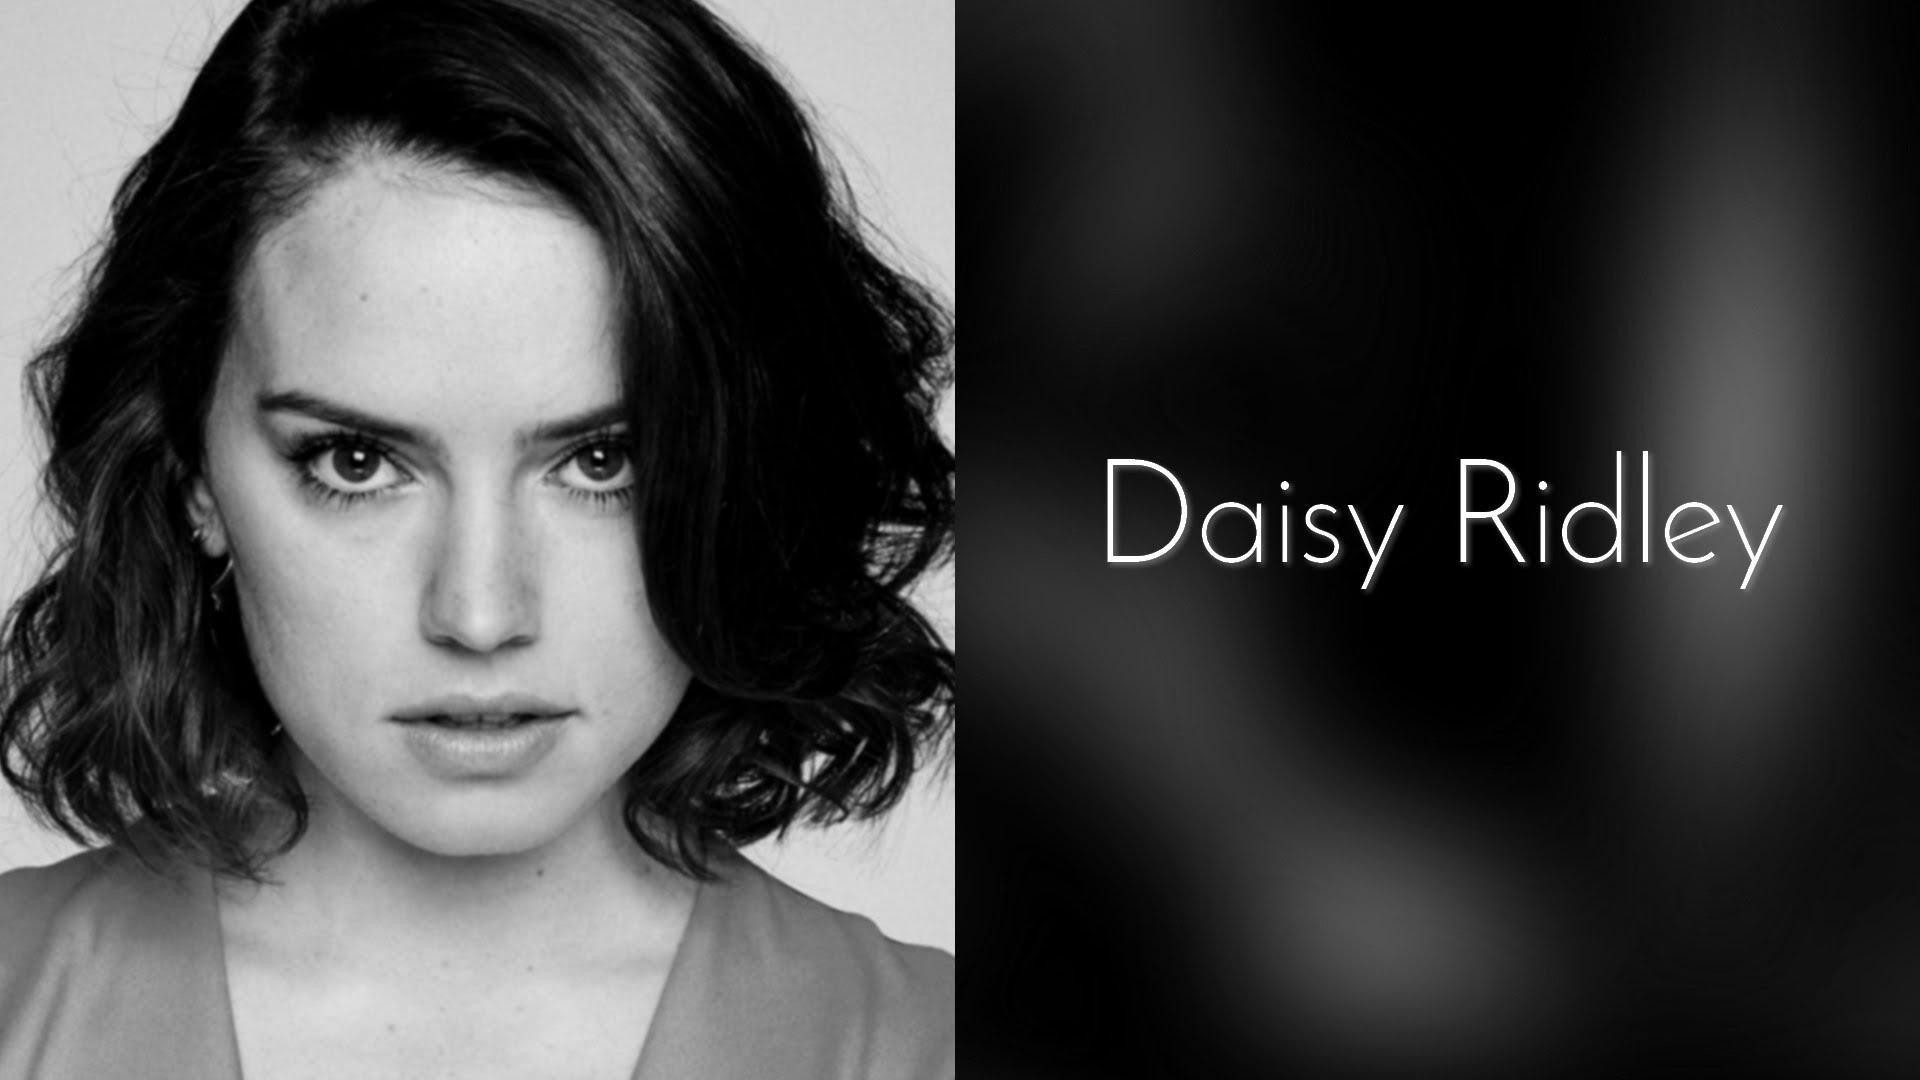 1920x1080 Daisy Ridley Wallpapers High Quality | Download Free